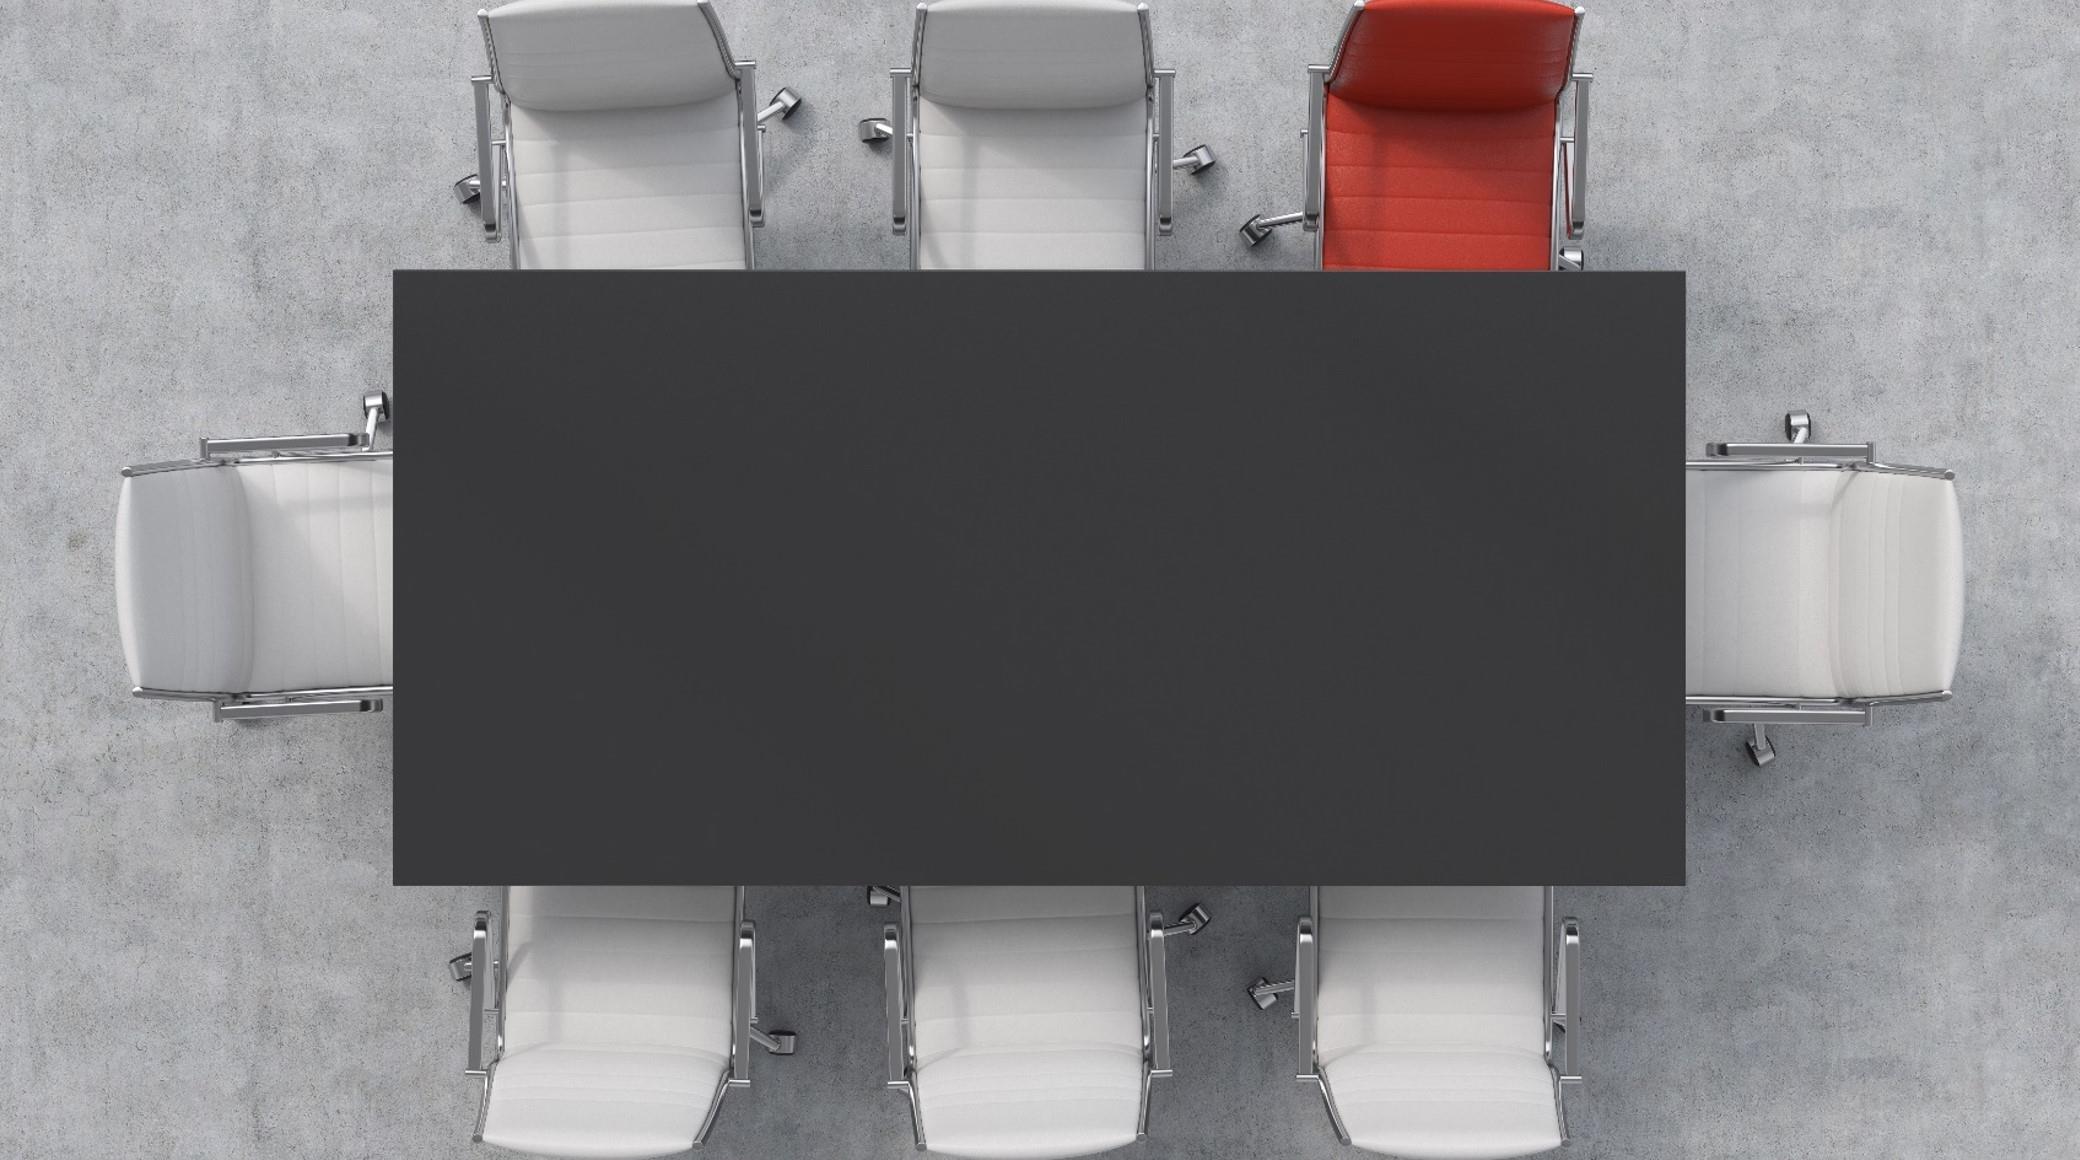 Aerial view of rectangular black table surrounded by white chairs plus one red chair